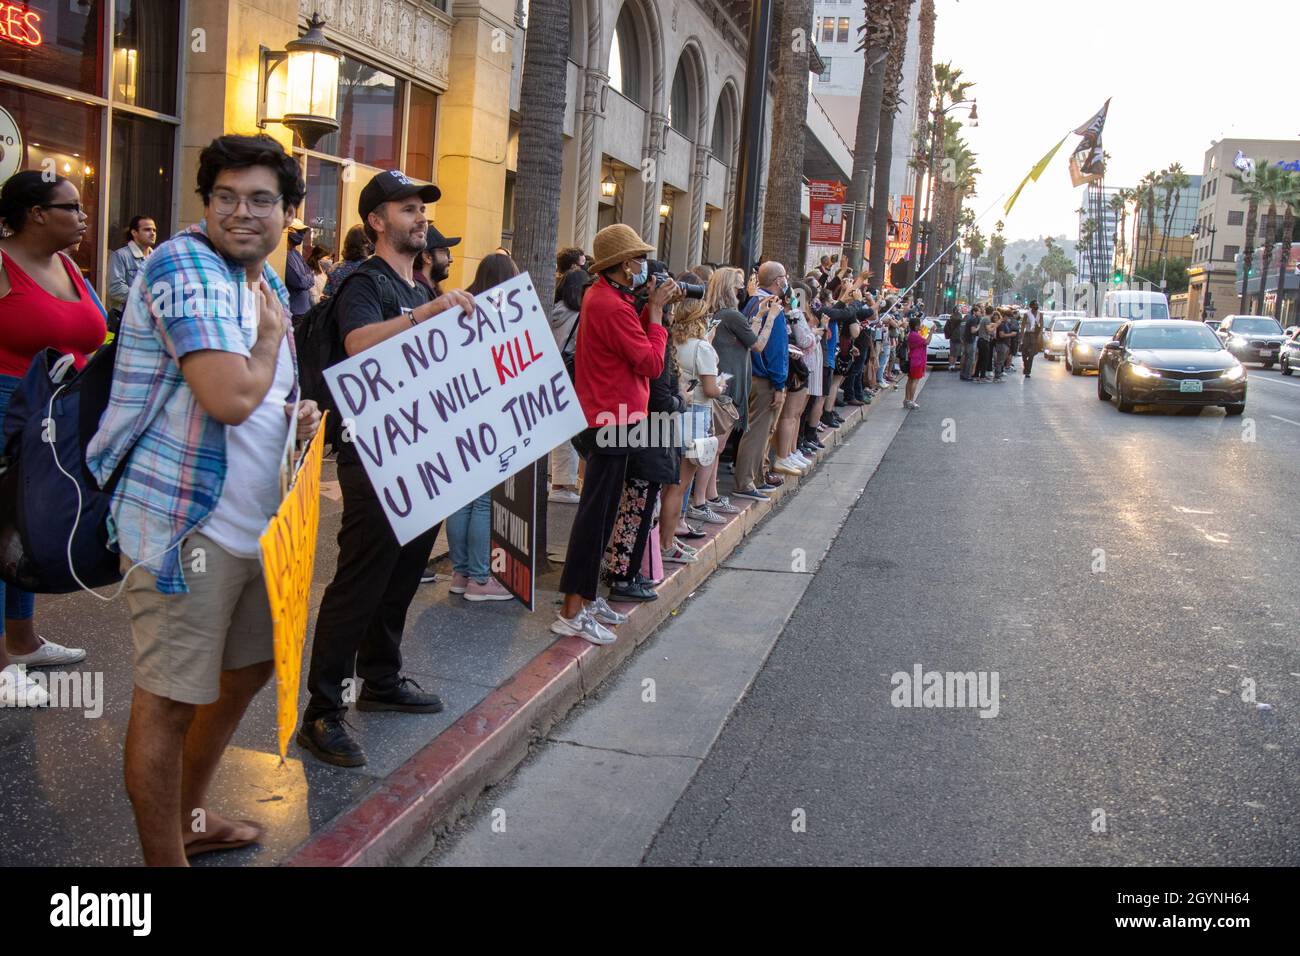 Anti covid-19 vaccine protestors across the street from the unveiling of Daniel Craig's star on the Hollywood Walk of Fame Stock Photo